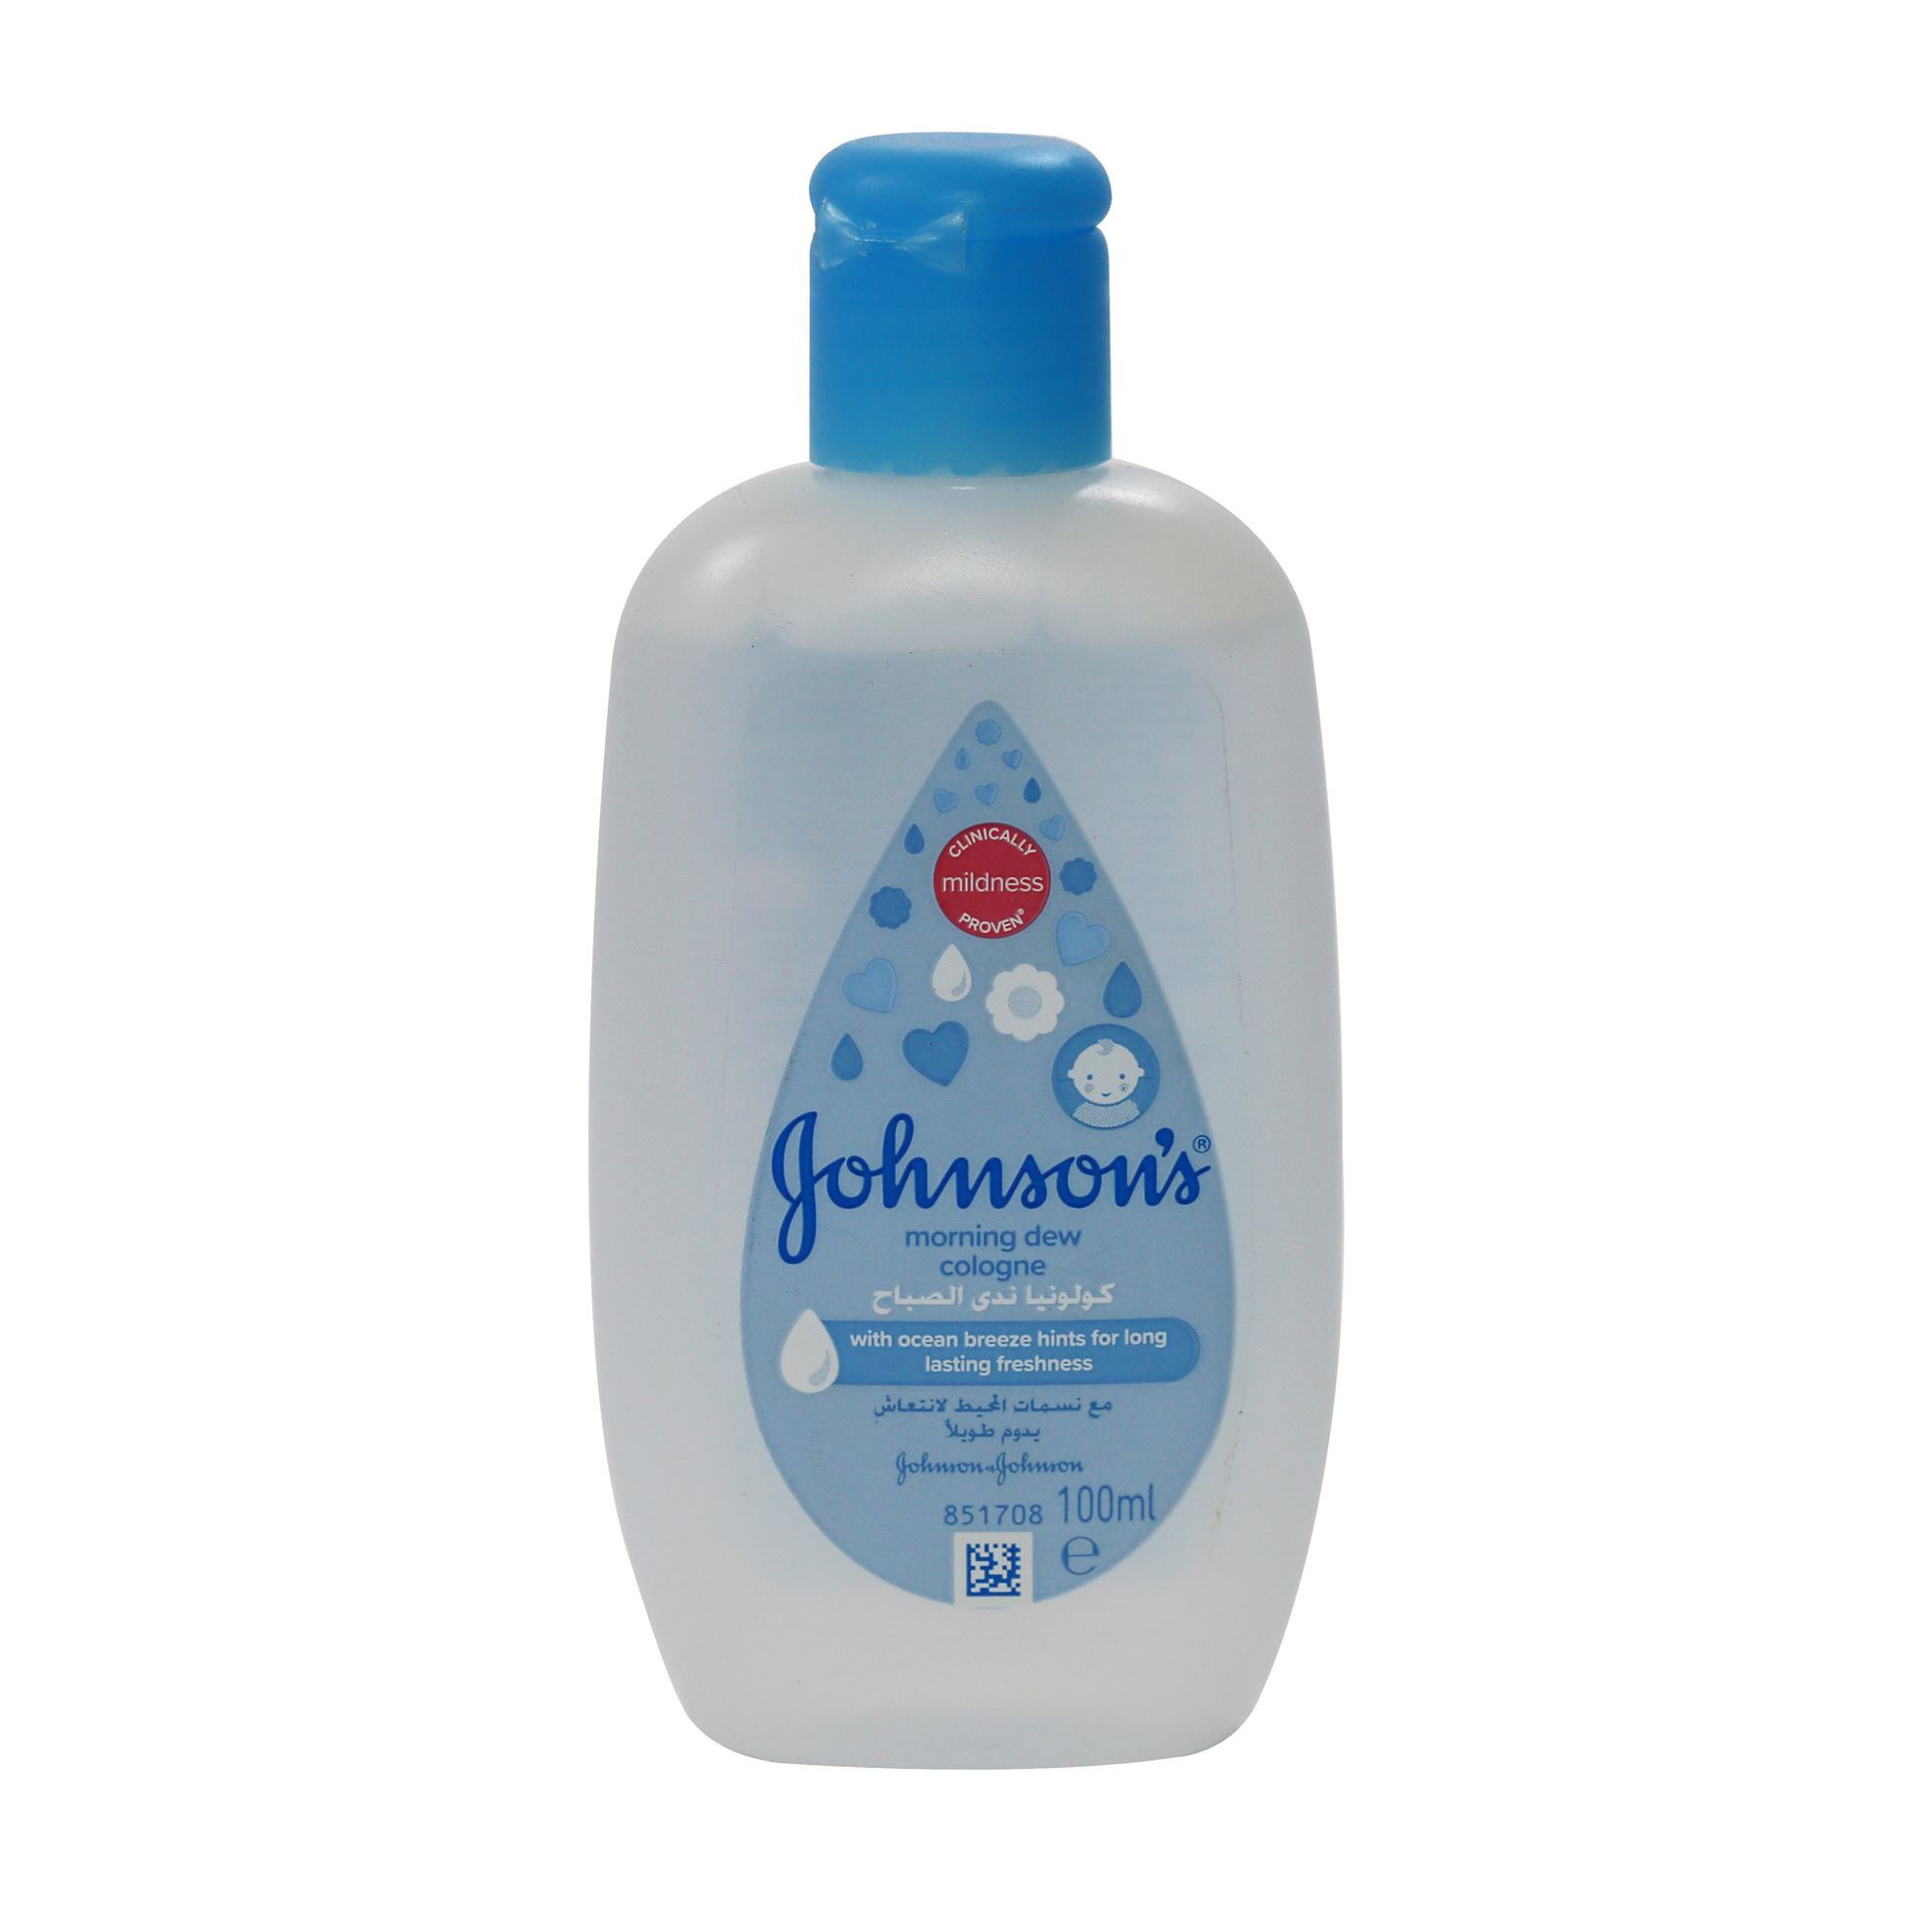 JOHNSON AND JOHNSON BABY MORNING DEW COLOGNE 100 ML